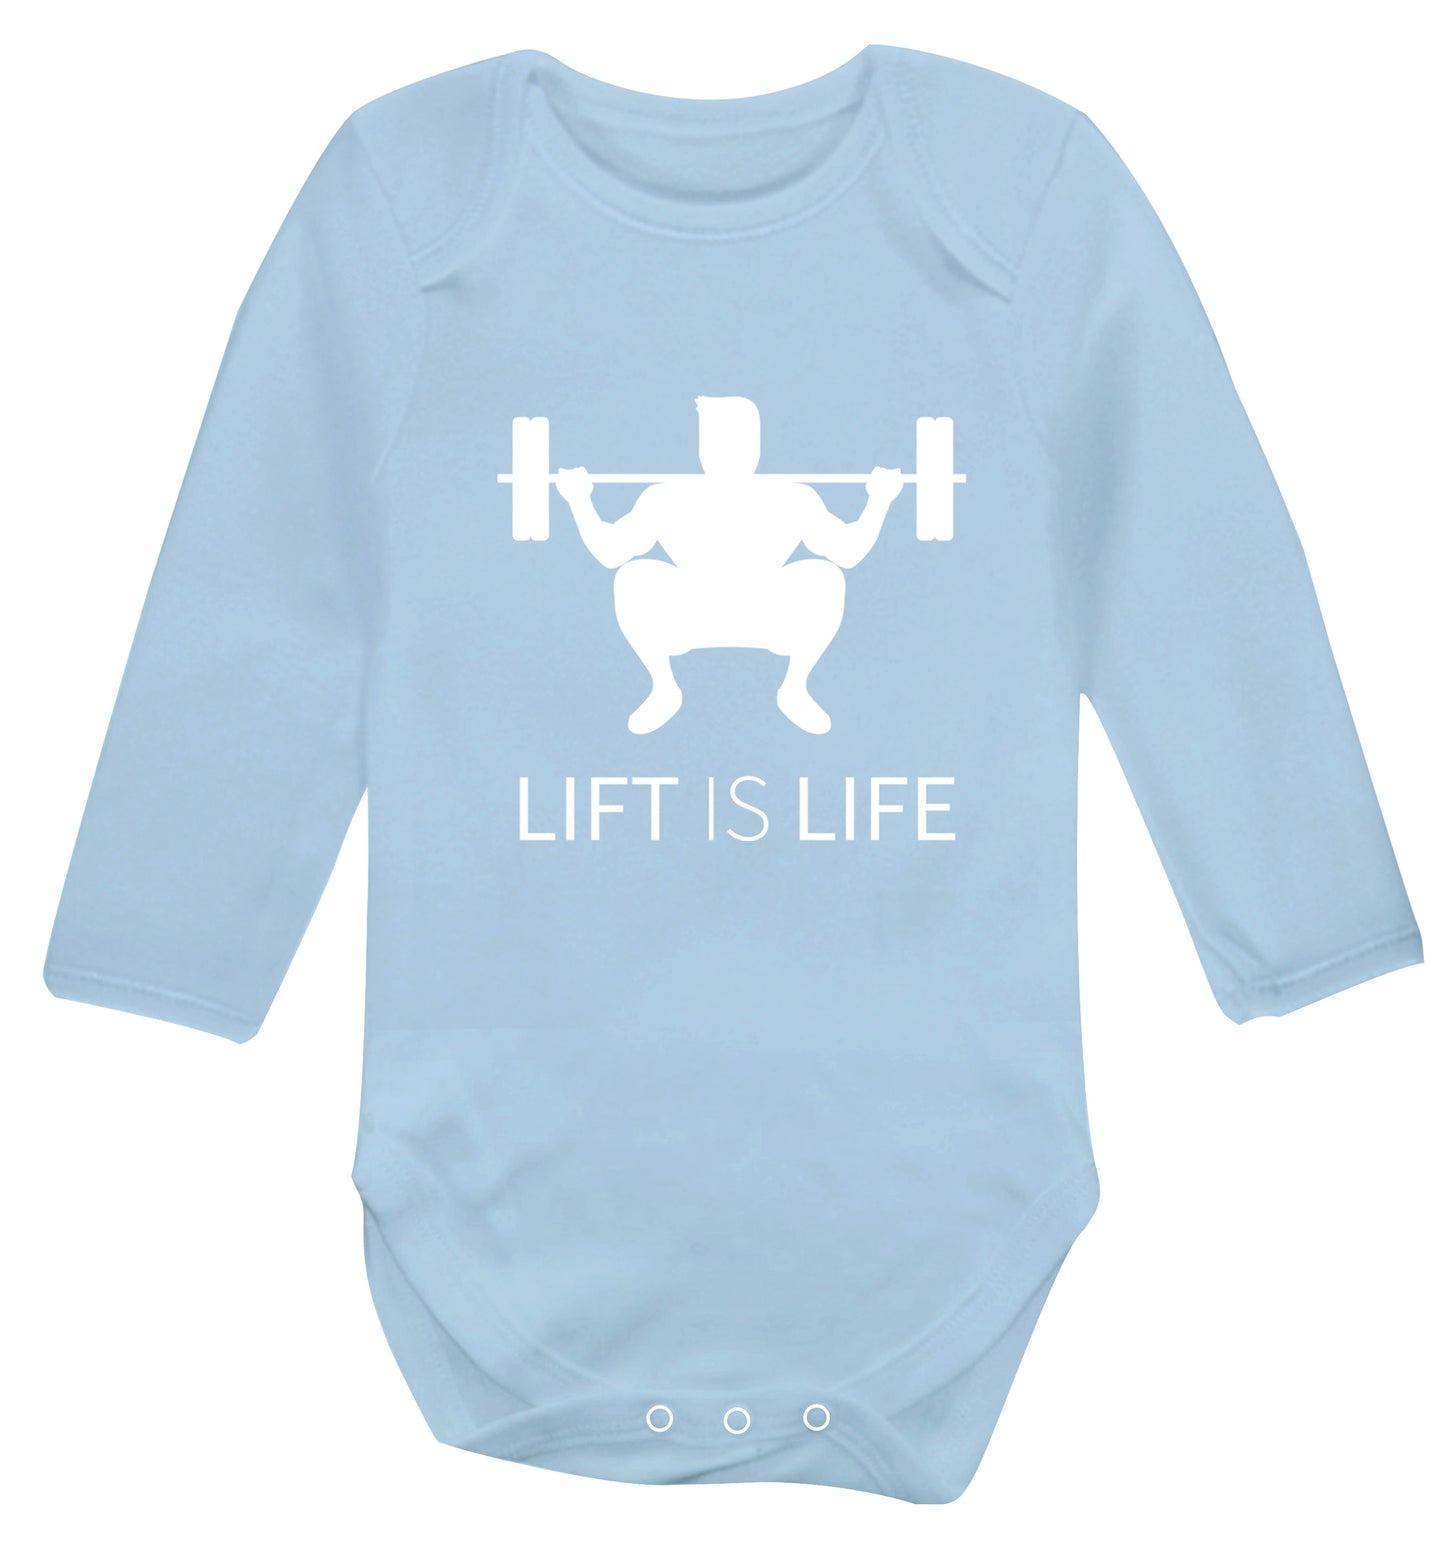 Lift is life Baby Vest long sleeved pale blue 6-12 months